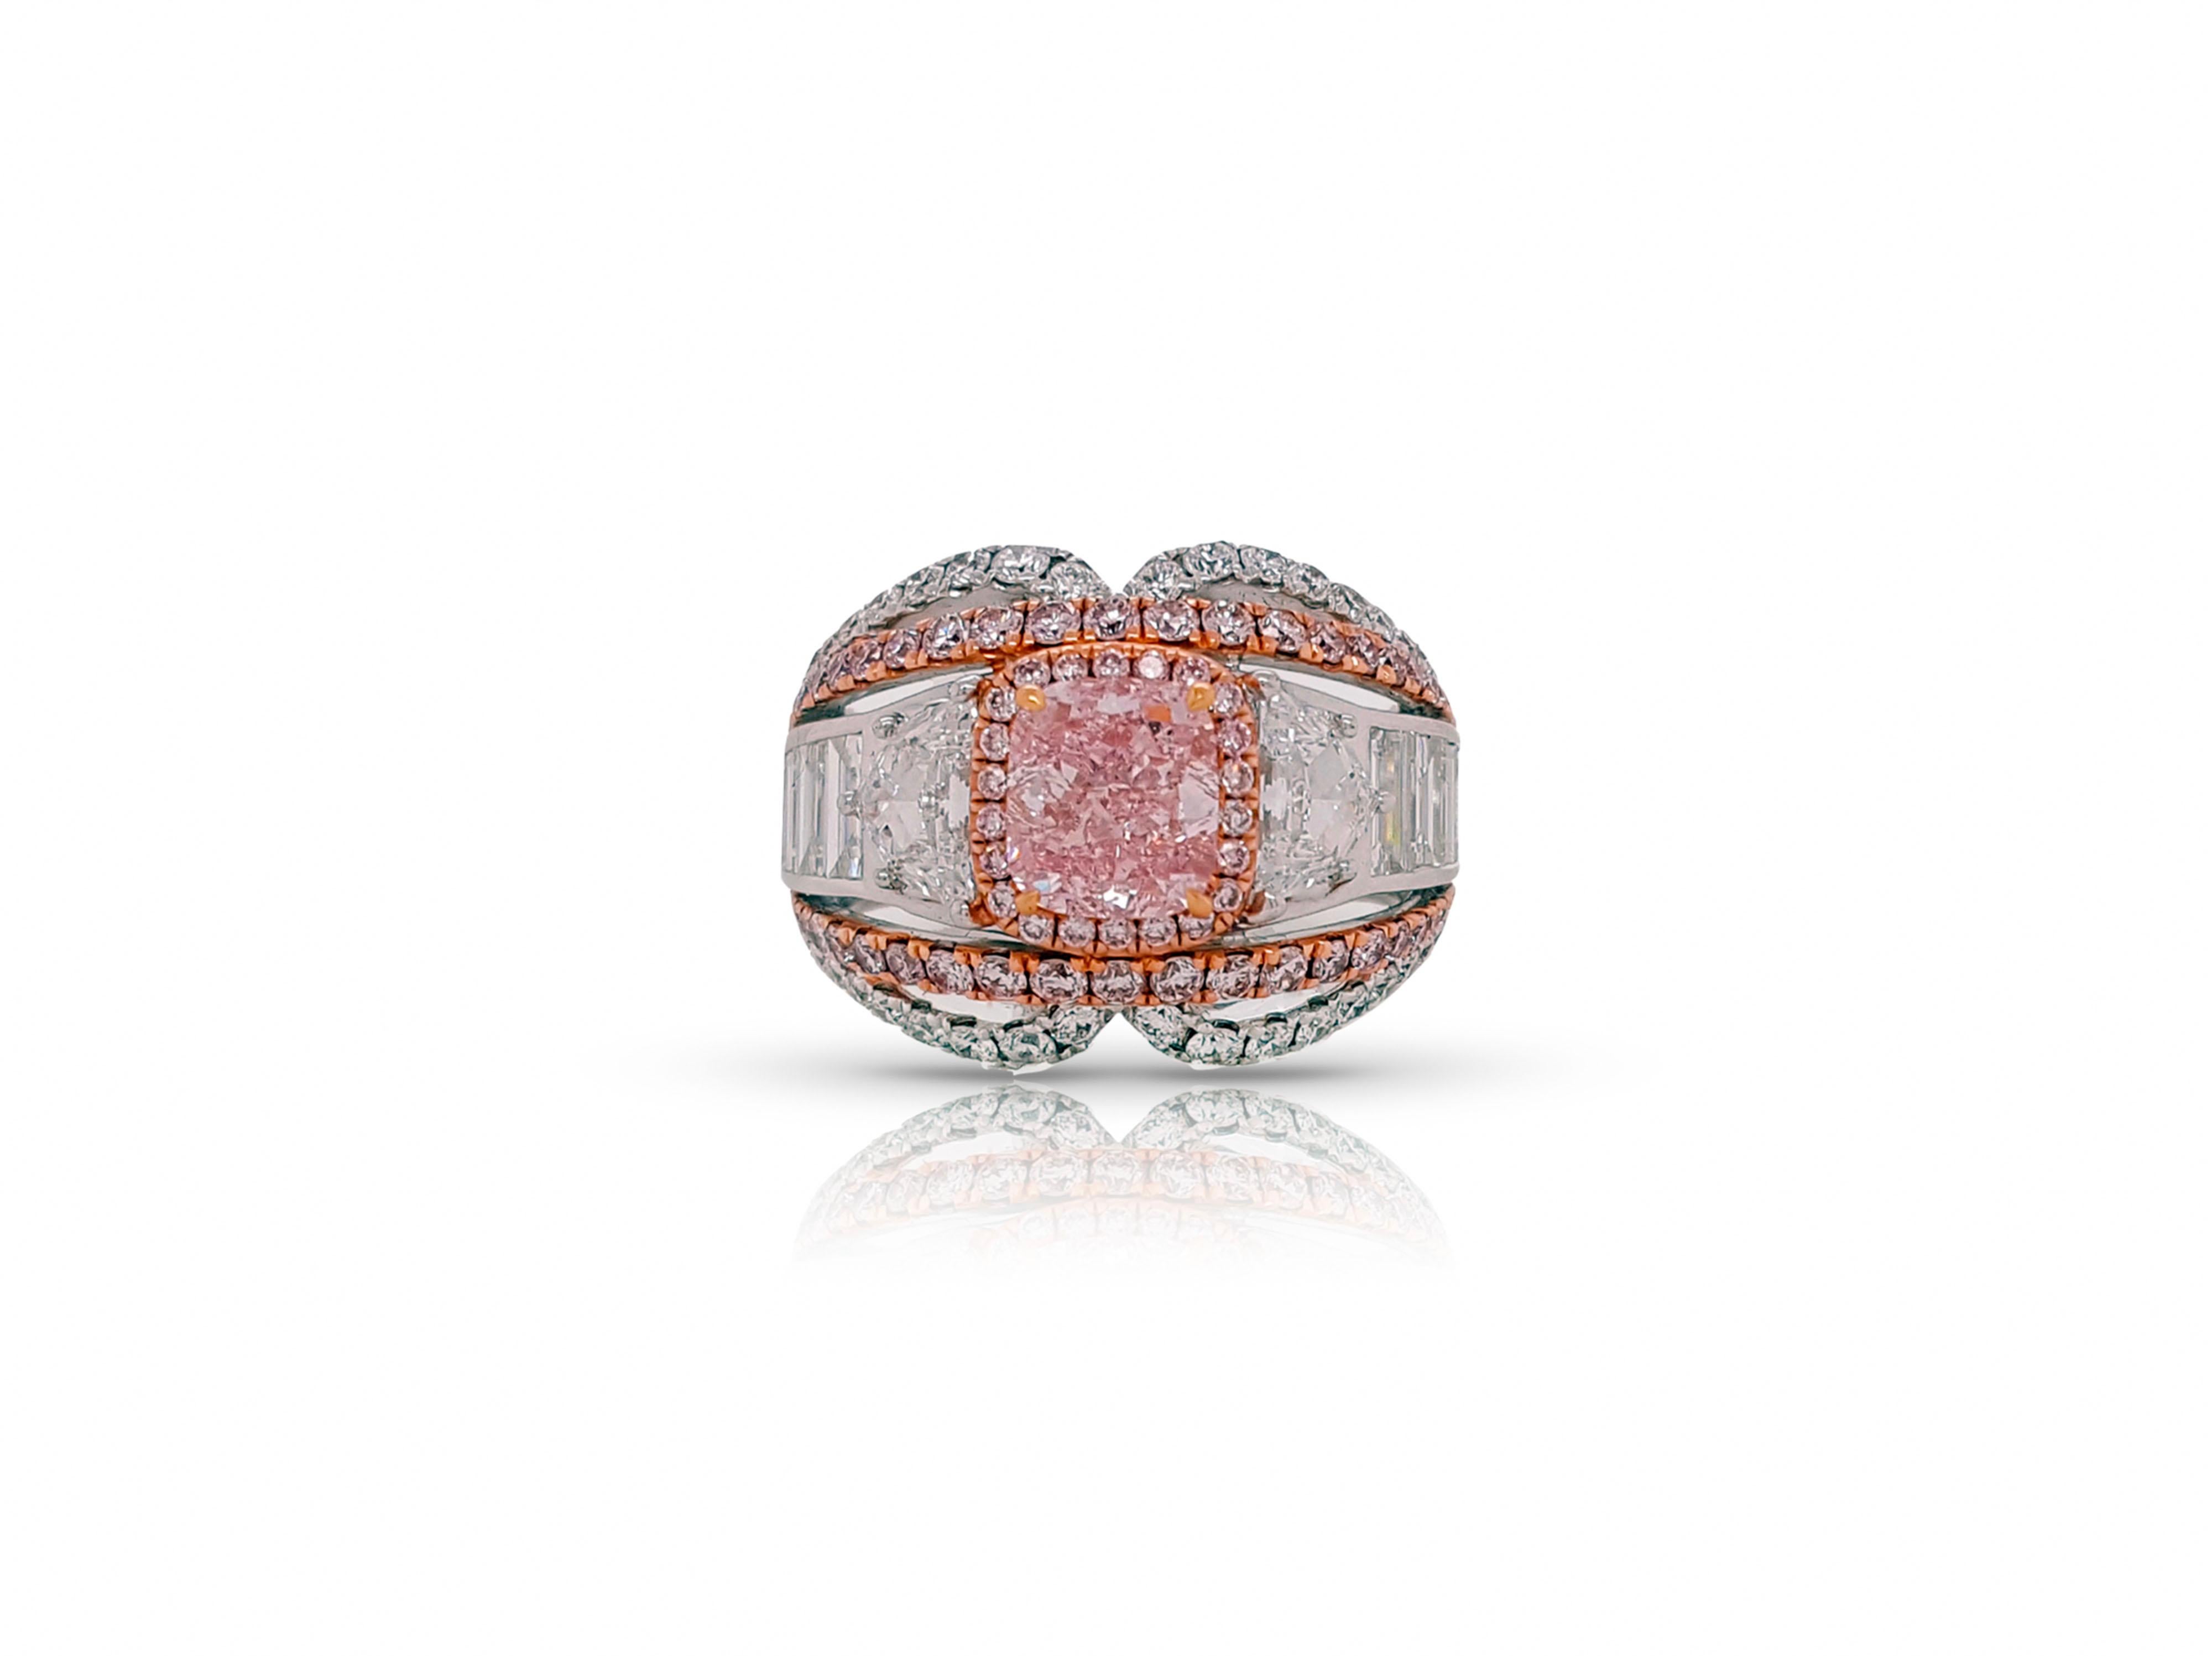 A remarkable 4.74 Carat total Engagement and cocktail diamond ring with a unique design that will leave admirers fawning from near and far. Showcasing GIA Certified 1.32 carat Fancy Intense Purple-Pink Diamond Cushion Cut, SI2 clarity, Flanked by